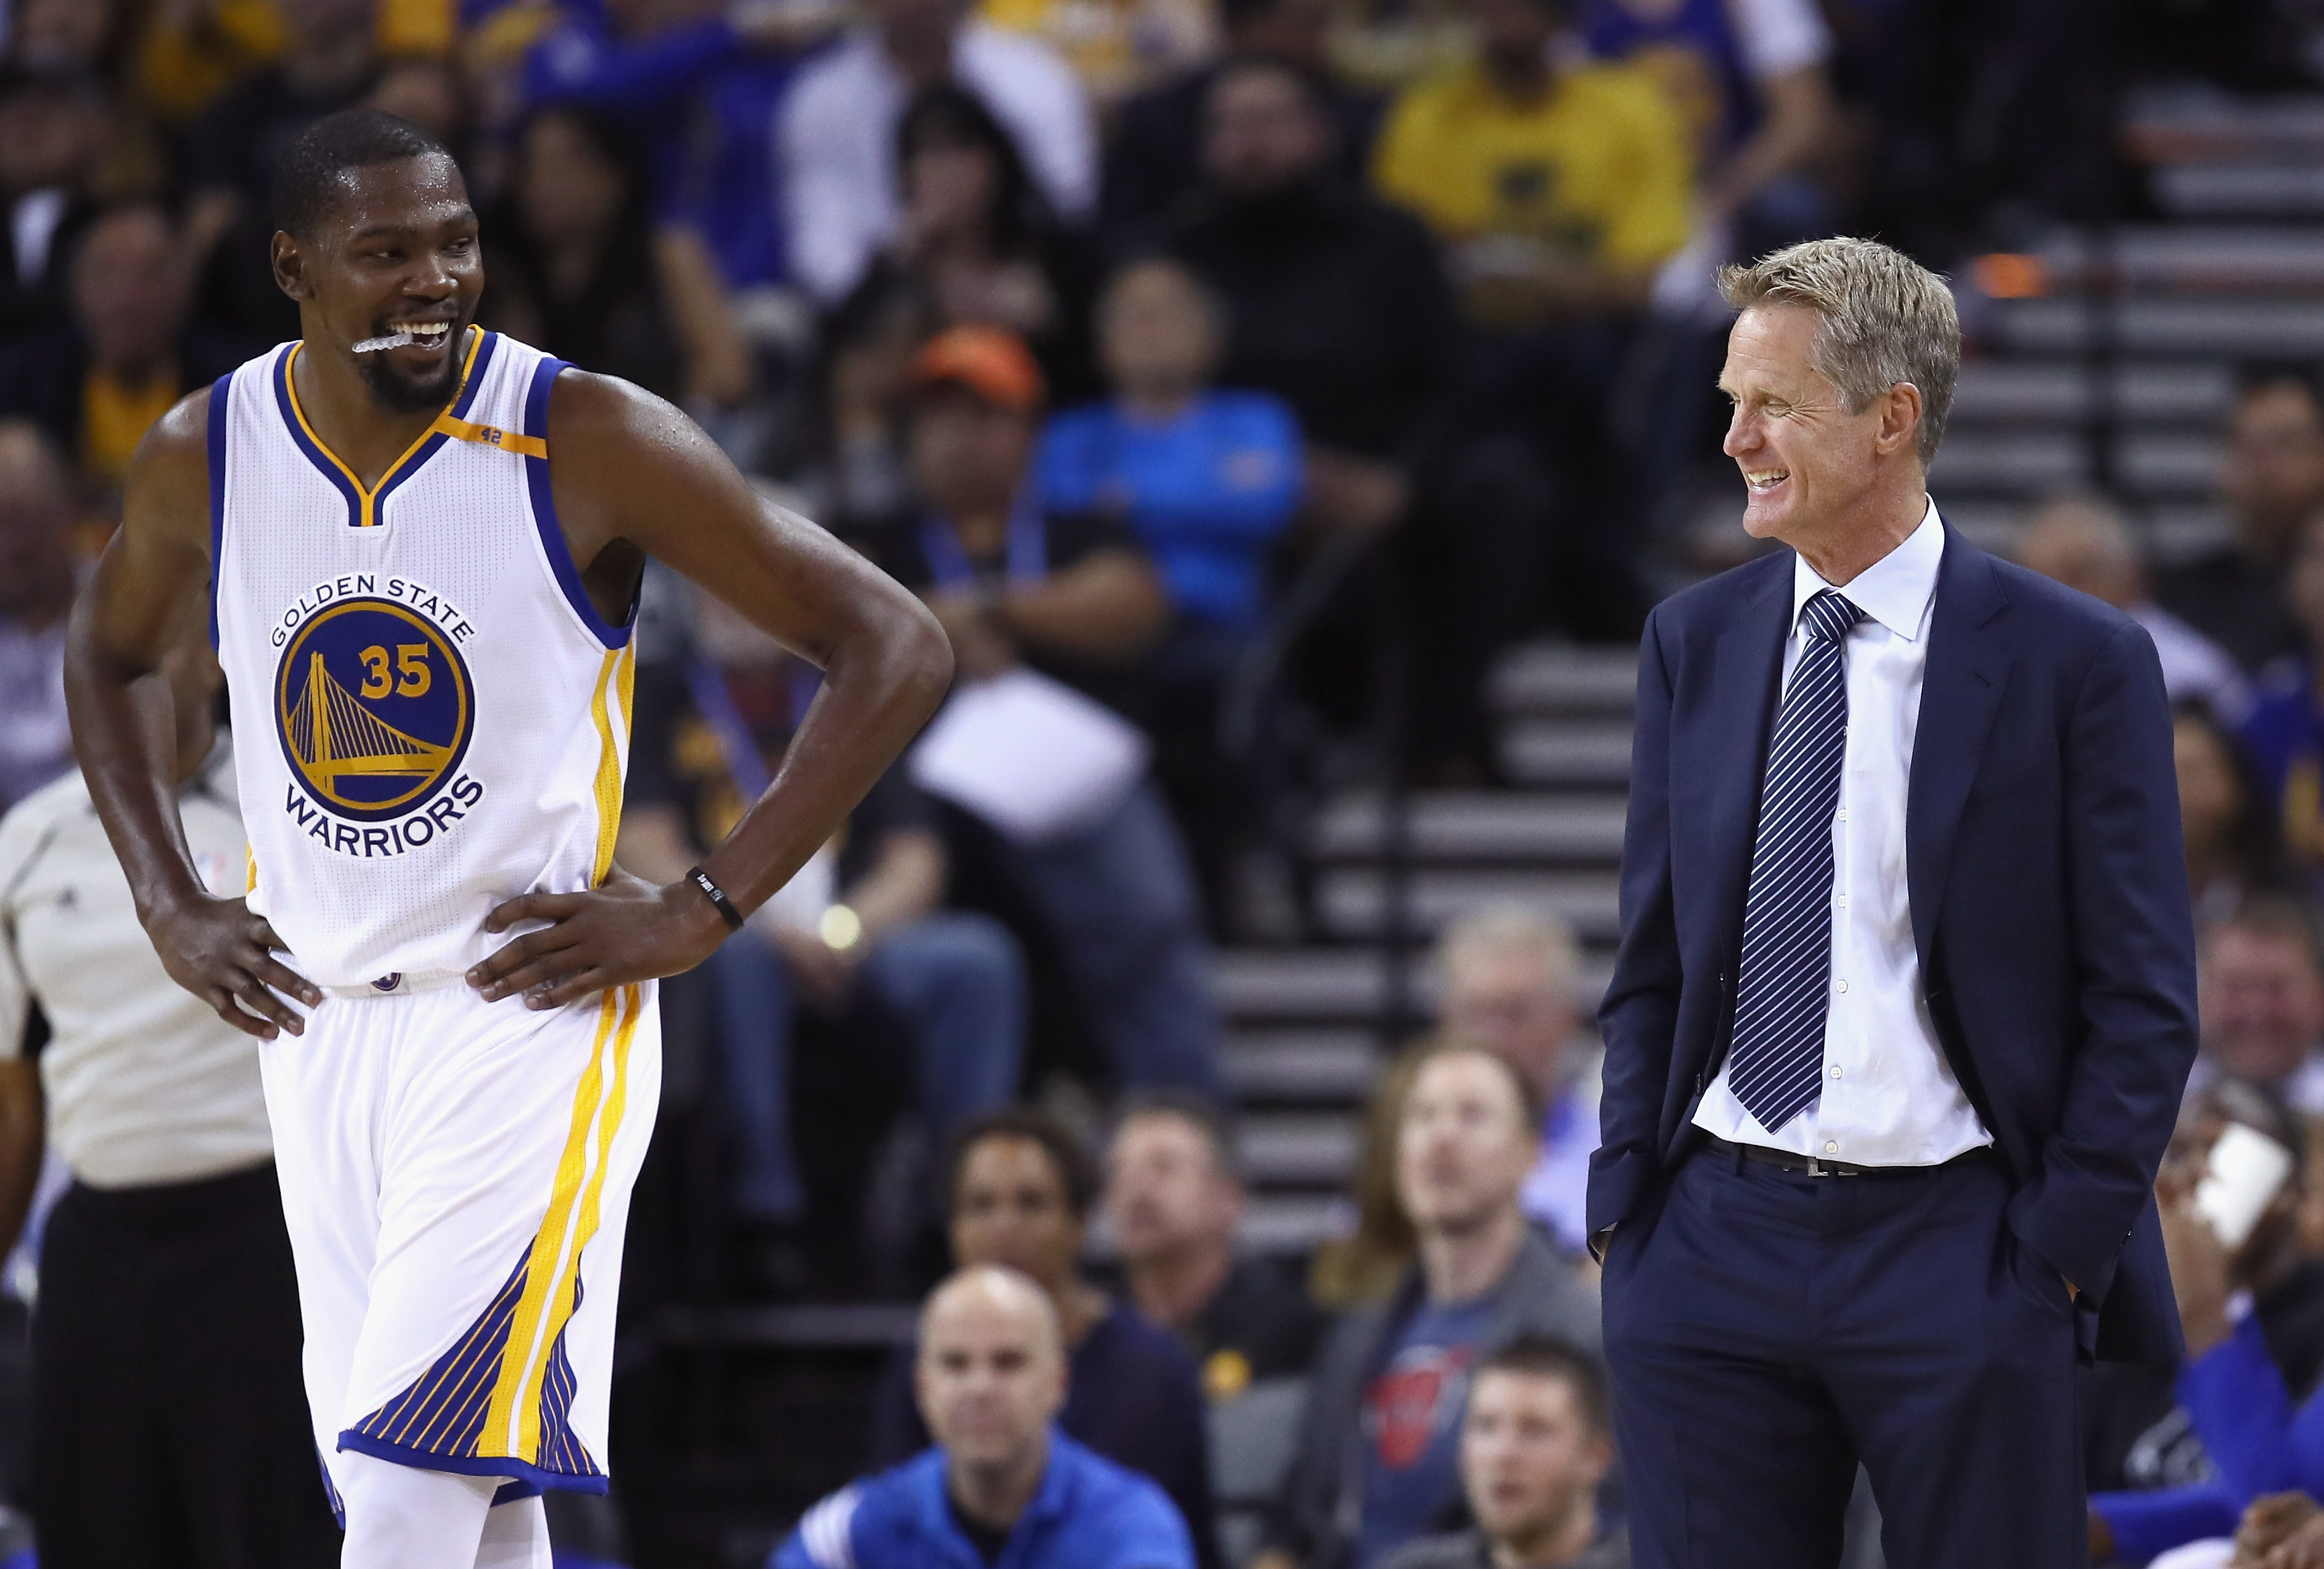 OAKLAND, CA - OCTOBER 04: Head coach Steve Kerr of the Golden State Warriors talks to Kevin Durant #35 during their preseason game against the Los Angeles Clippers at ORACLE Arena on October 4, 2016 in Oakland, California. NOTE TO USER: User expressly acknowledges and agrees that, by downloading and or using this photograph, User is consenting to the terms and conditions of the Getty Images License Agreement.   Ezra Shaw/Getty Images/AFP